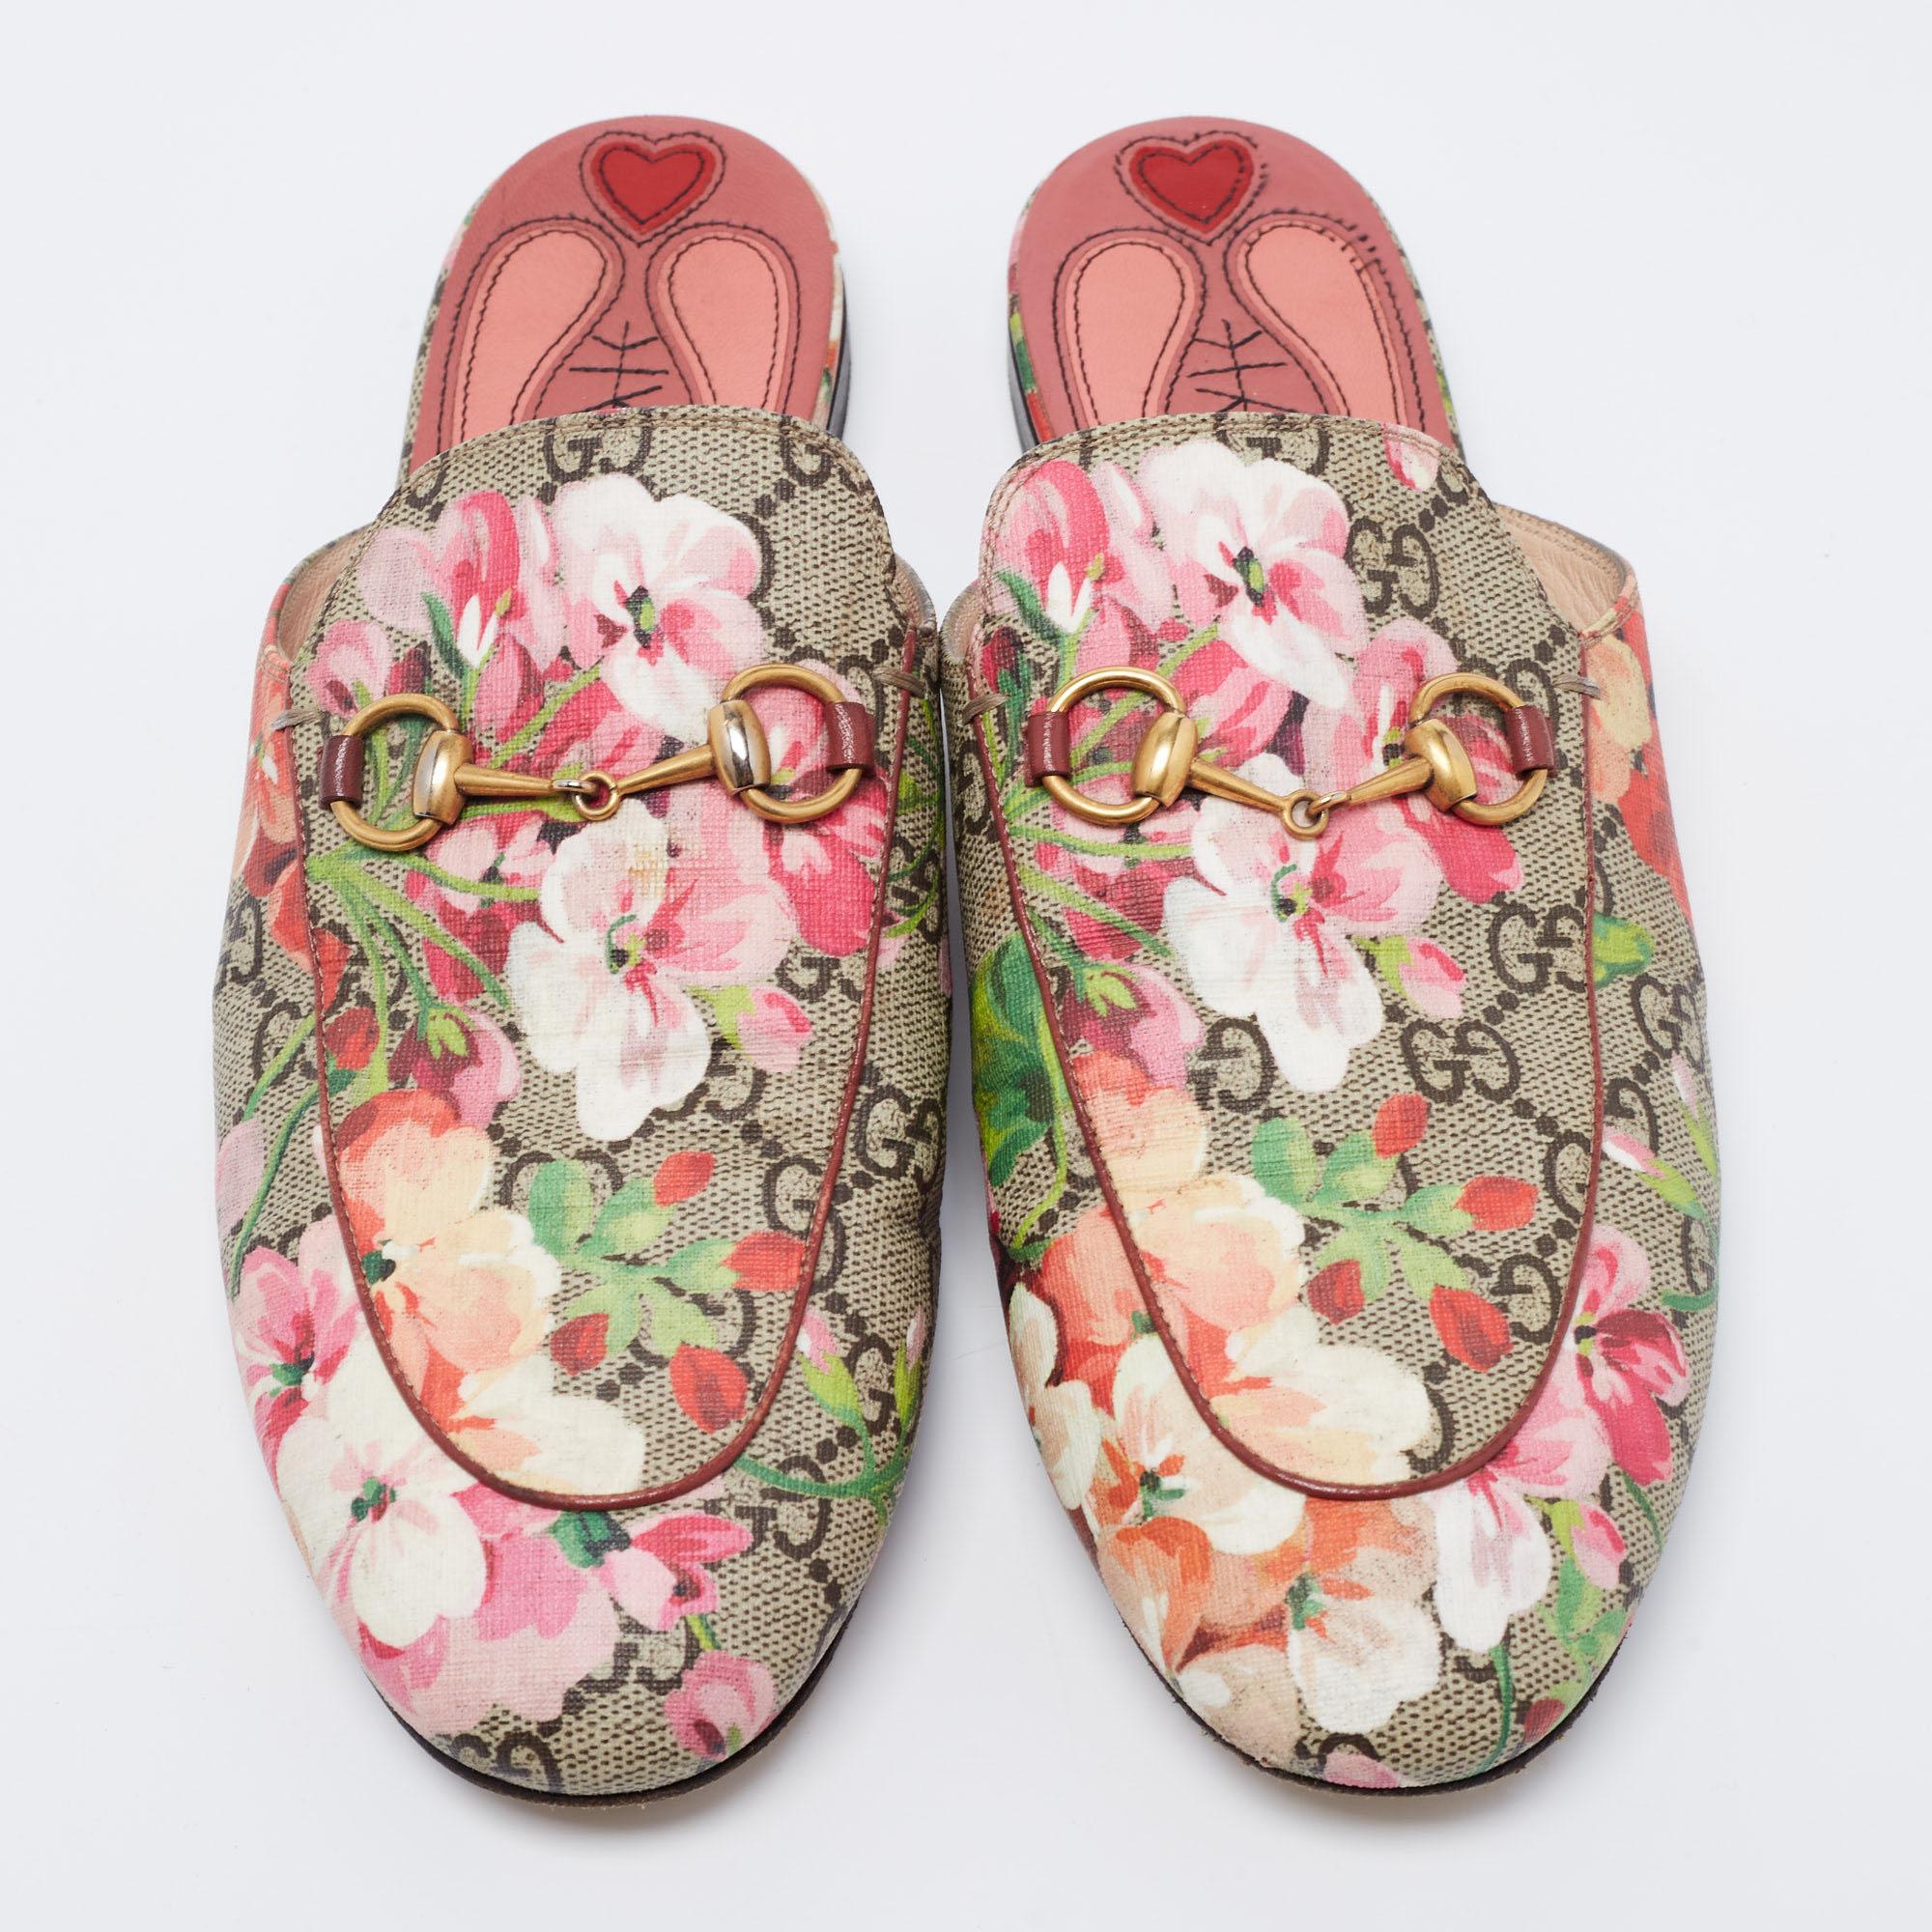 These Gucci Princetown mules signify luxury and practicality. An ultimate favorite of style enthusiasts, the silhouette of this pair gets a luxe update with the Horsebit motif on the uppers. It comes made from GG Supreme canvas with striking bloom